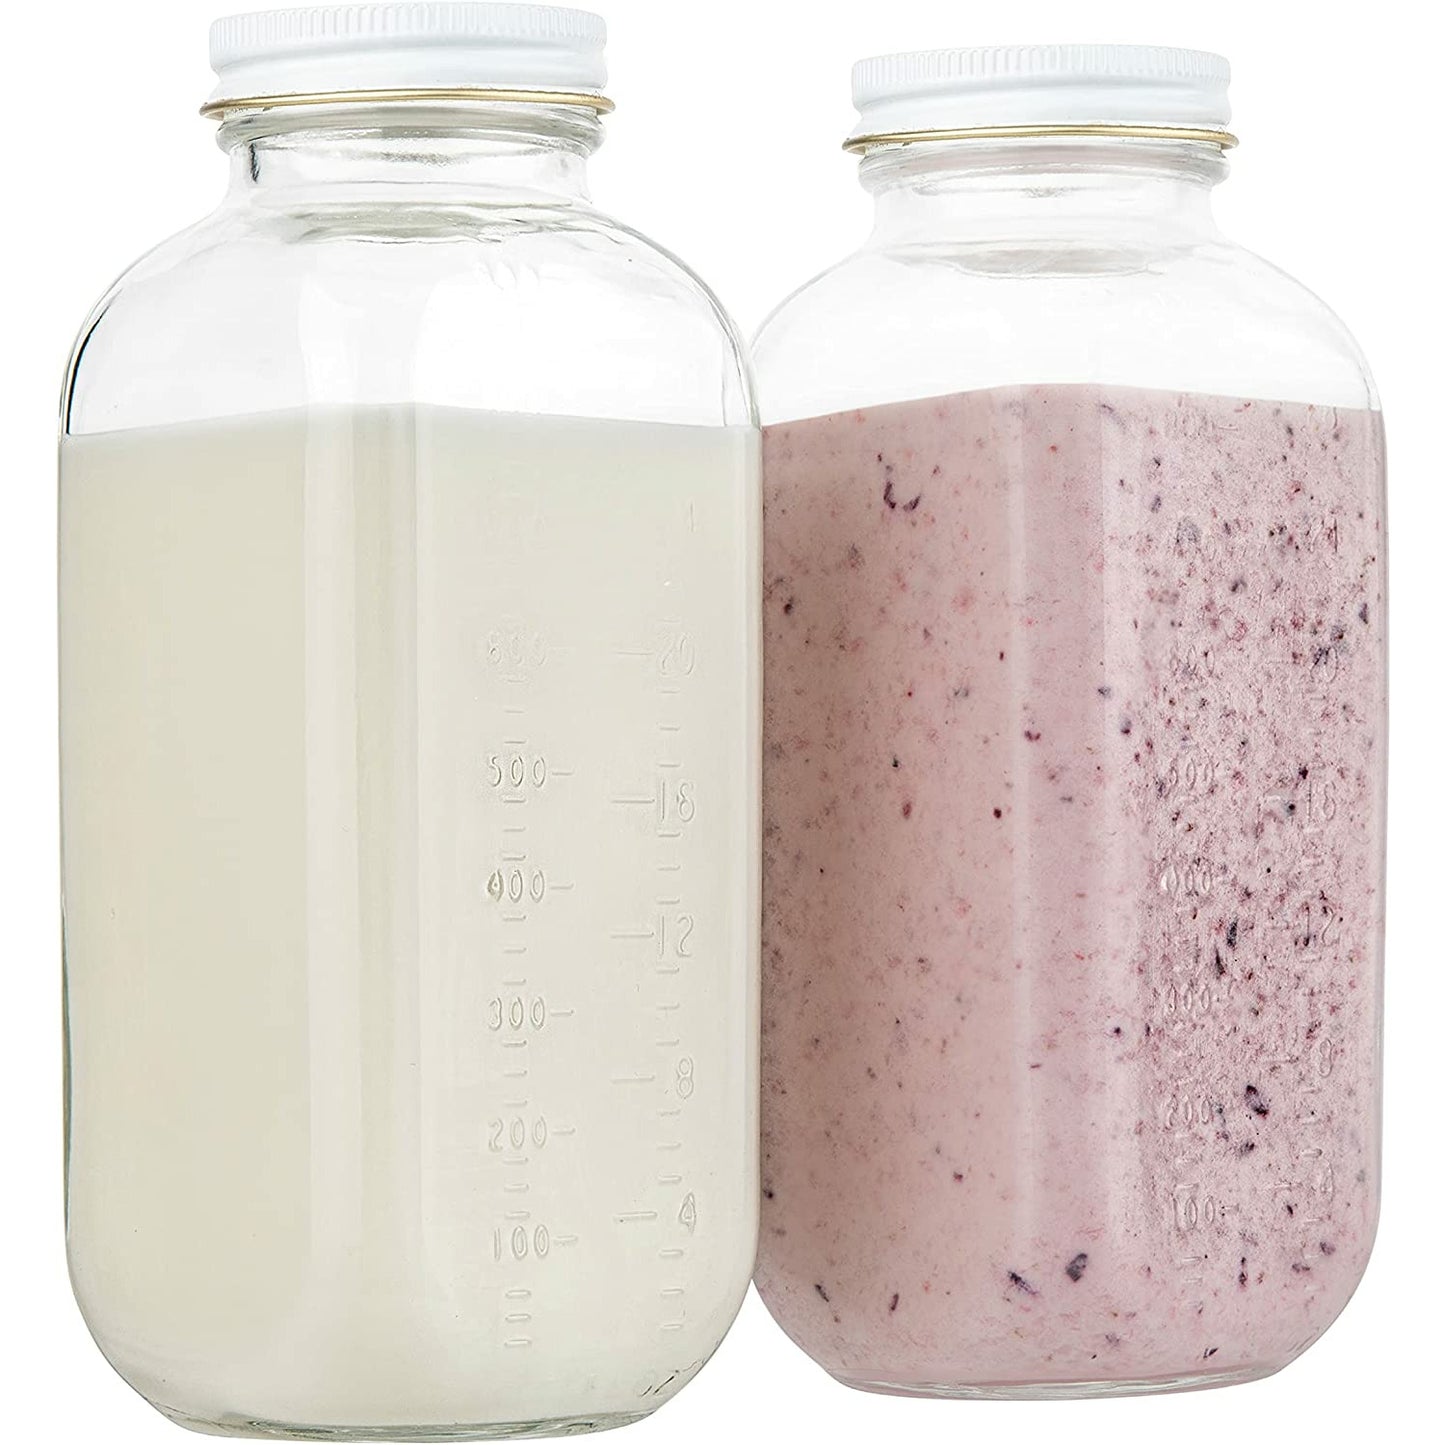 kitchentoolz 32oz Square Glass Milk Bottle with Plastic Airtight Lids,  Reusable Dairy Drinking Conta…See more kitchentoolz 32oz Square Glass Milk